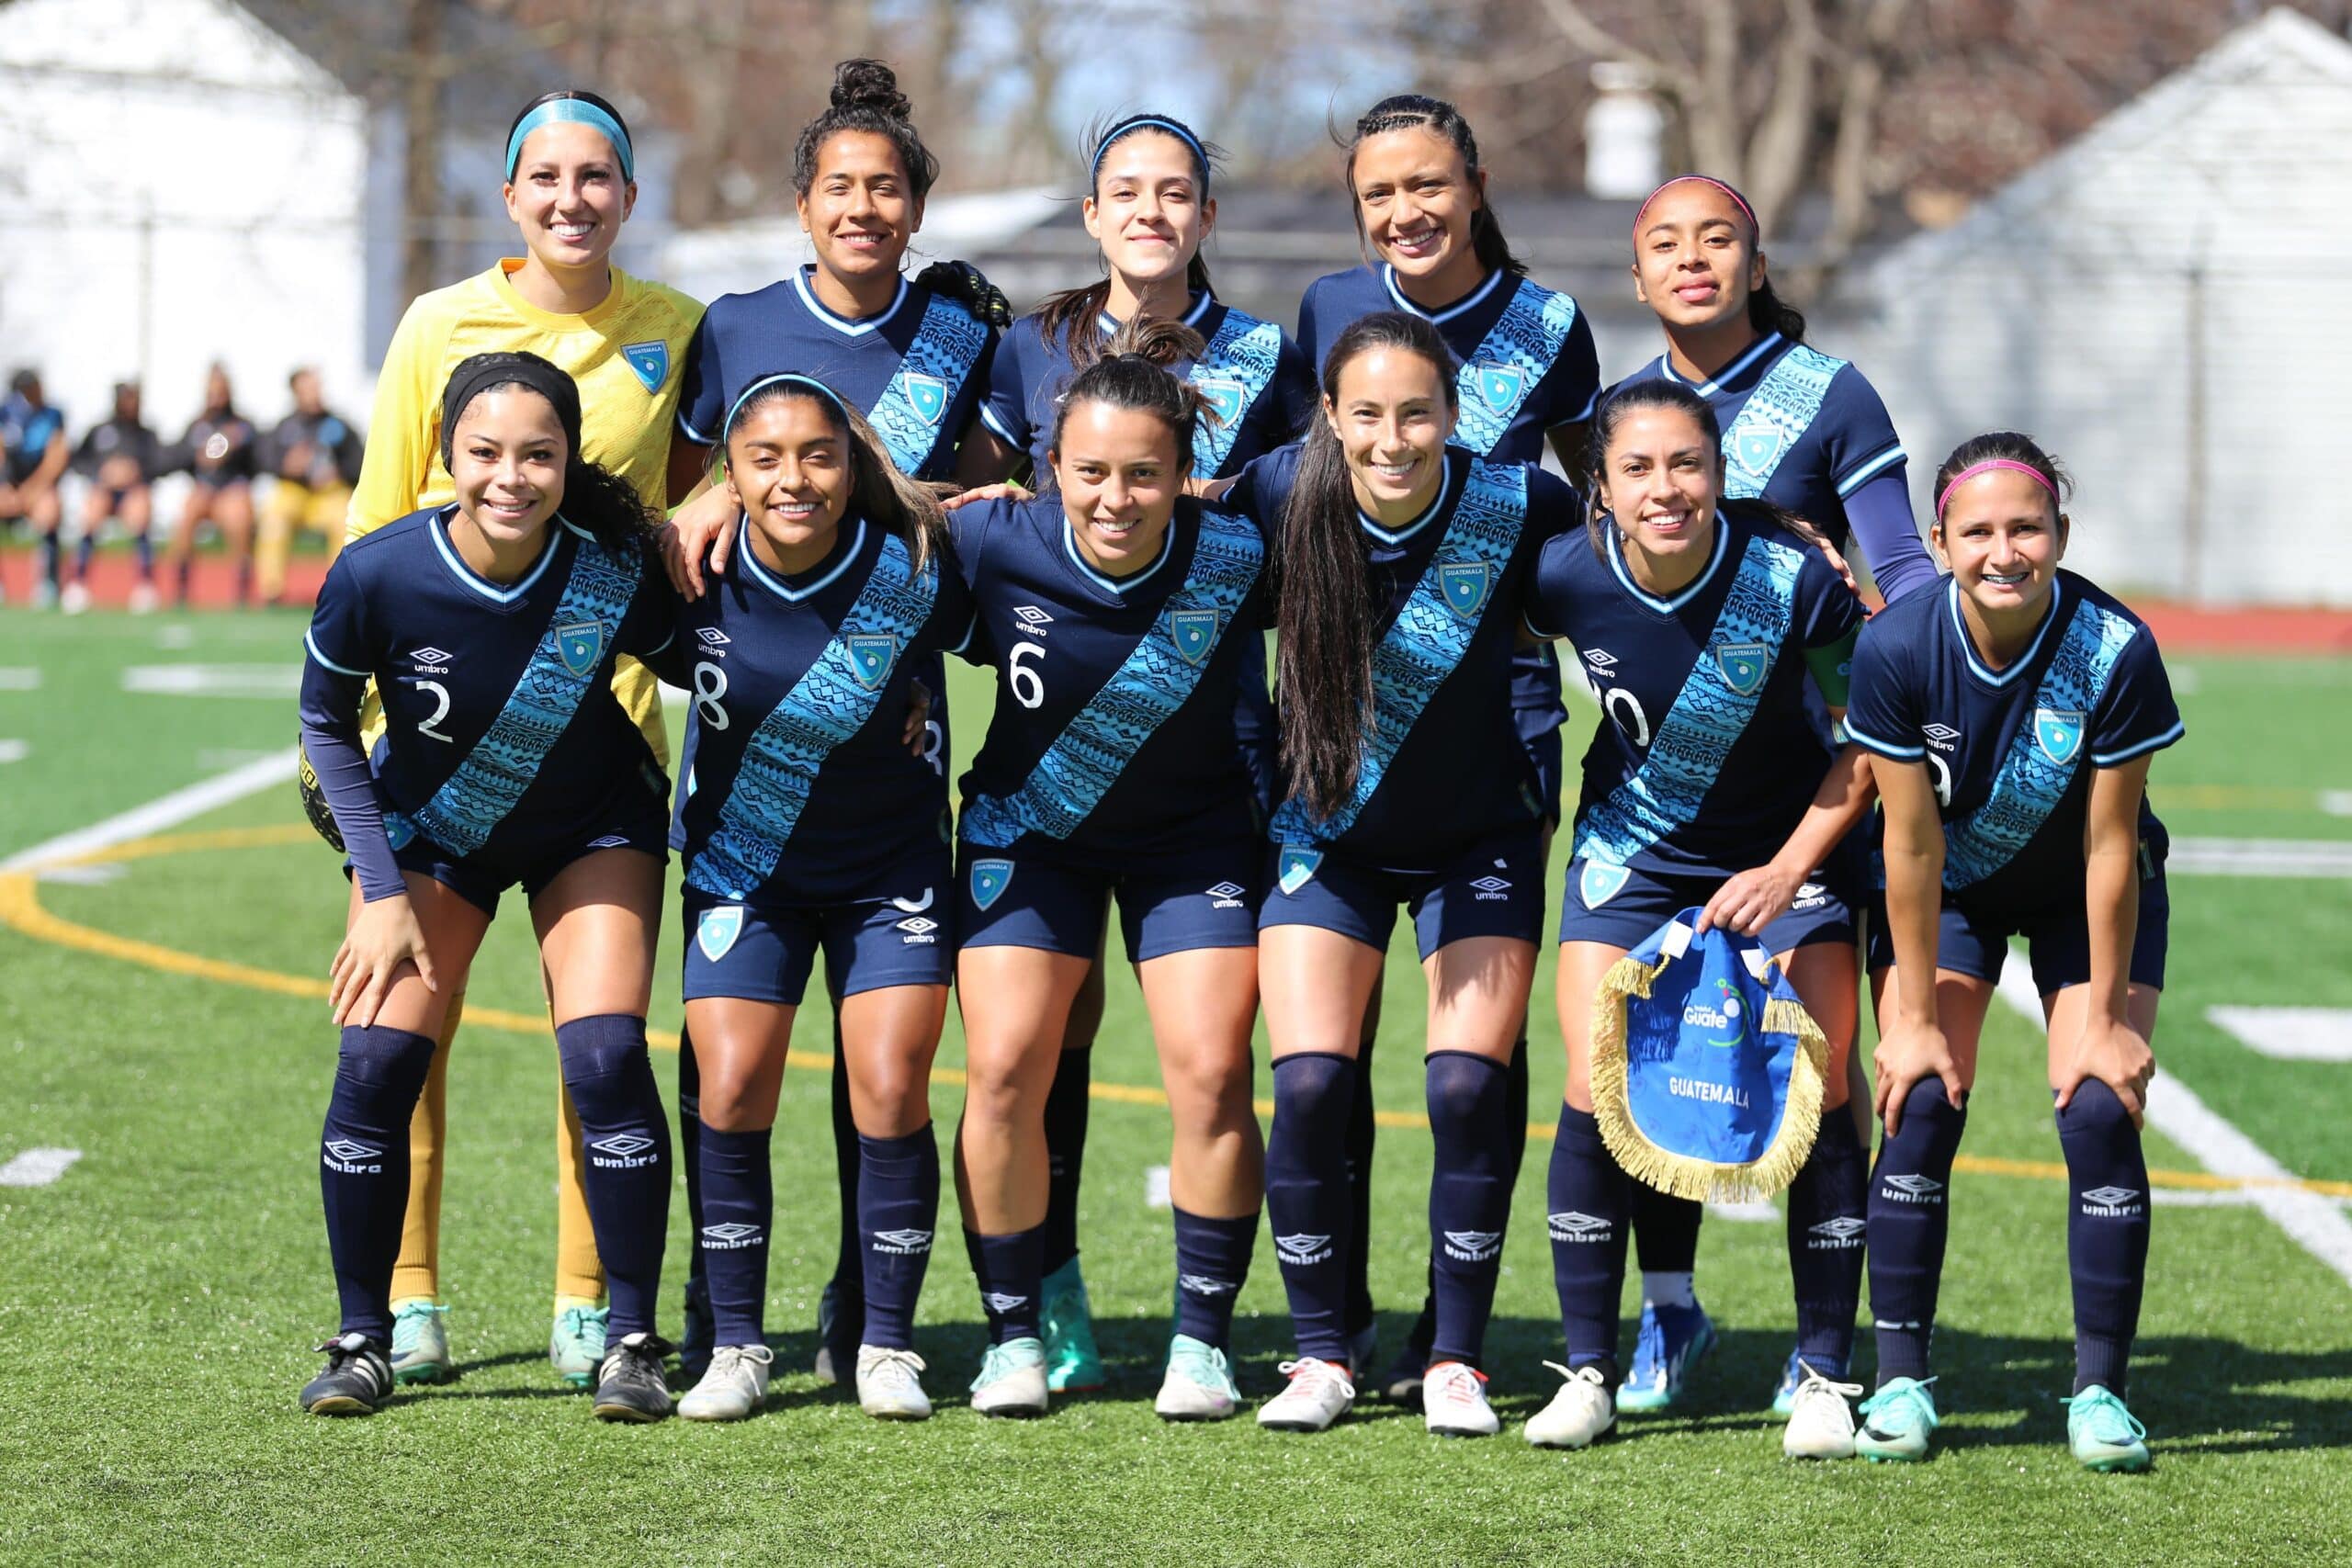 The women's national team wins its first friendly match in the United States